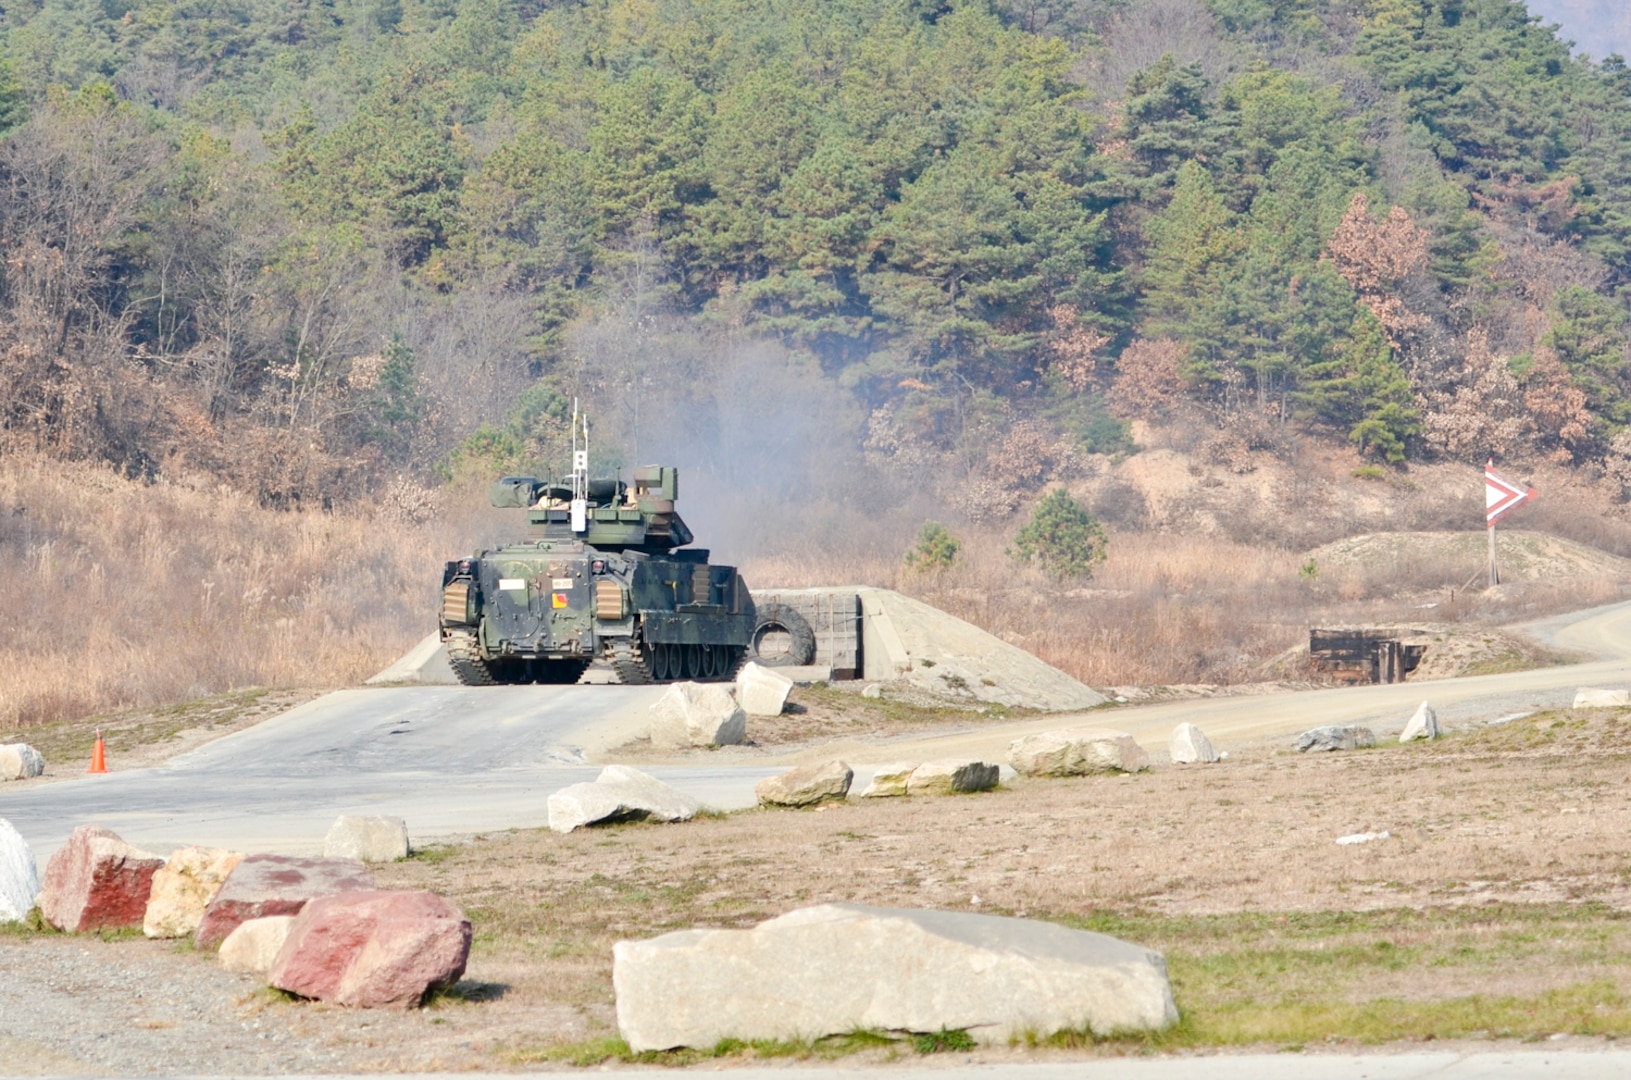 POCHEON, Republic of Korea -- An M2 Bradley Infantry Fighting Vehicle from 2nd Battalion, 34th Armor Regiment, 1st Armored Brigade Combat Team, 1st Infantry Division, conducts a live-fire gunnery range at the Rodriguez Live Fire Complex Nov. 19. The battalion is the first of many from the 1st ABCT, 1st Inf. Div. to conduct a 30-day rotation at the RLFC and will continue to train on their weapons systems in order to deter regional aggression, maintain peace on the Korean peninsula and, if needed, "Fight Tonight" in support of the 2nd Inf. Div. / ROK-U.S. Combined Division alliance. (U.S. Army Photo by 1st Lt. Patrina Lowrie, 2nd Bn. 34th Armor Rgmt./Released)